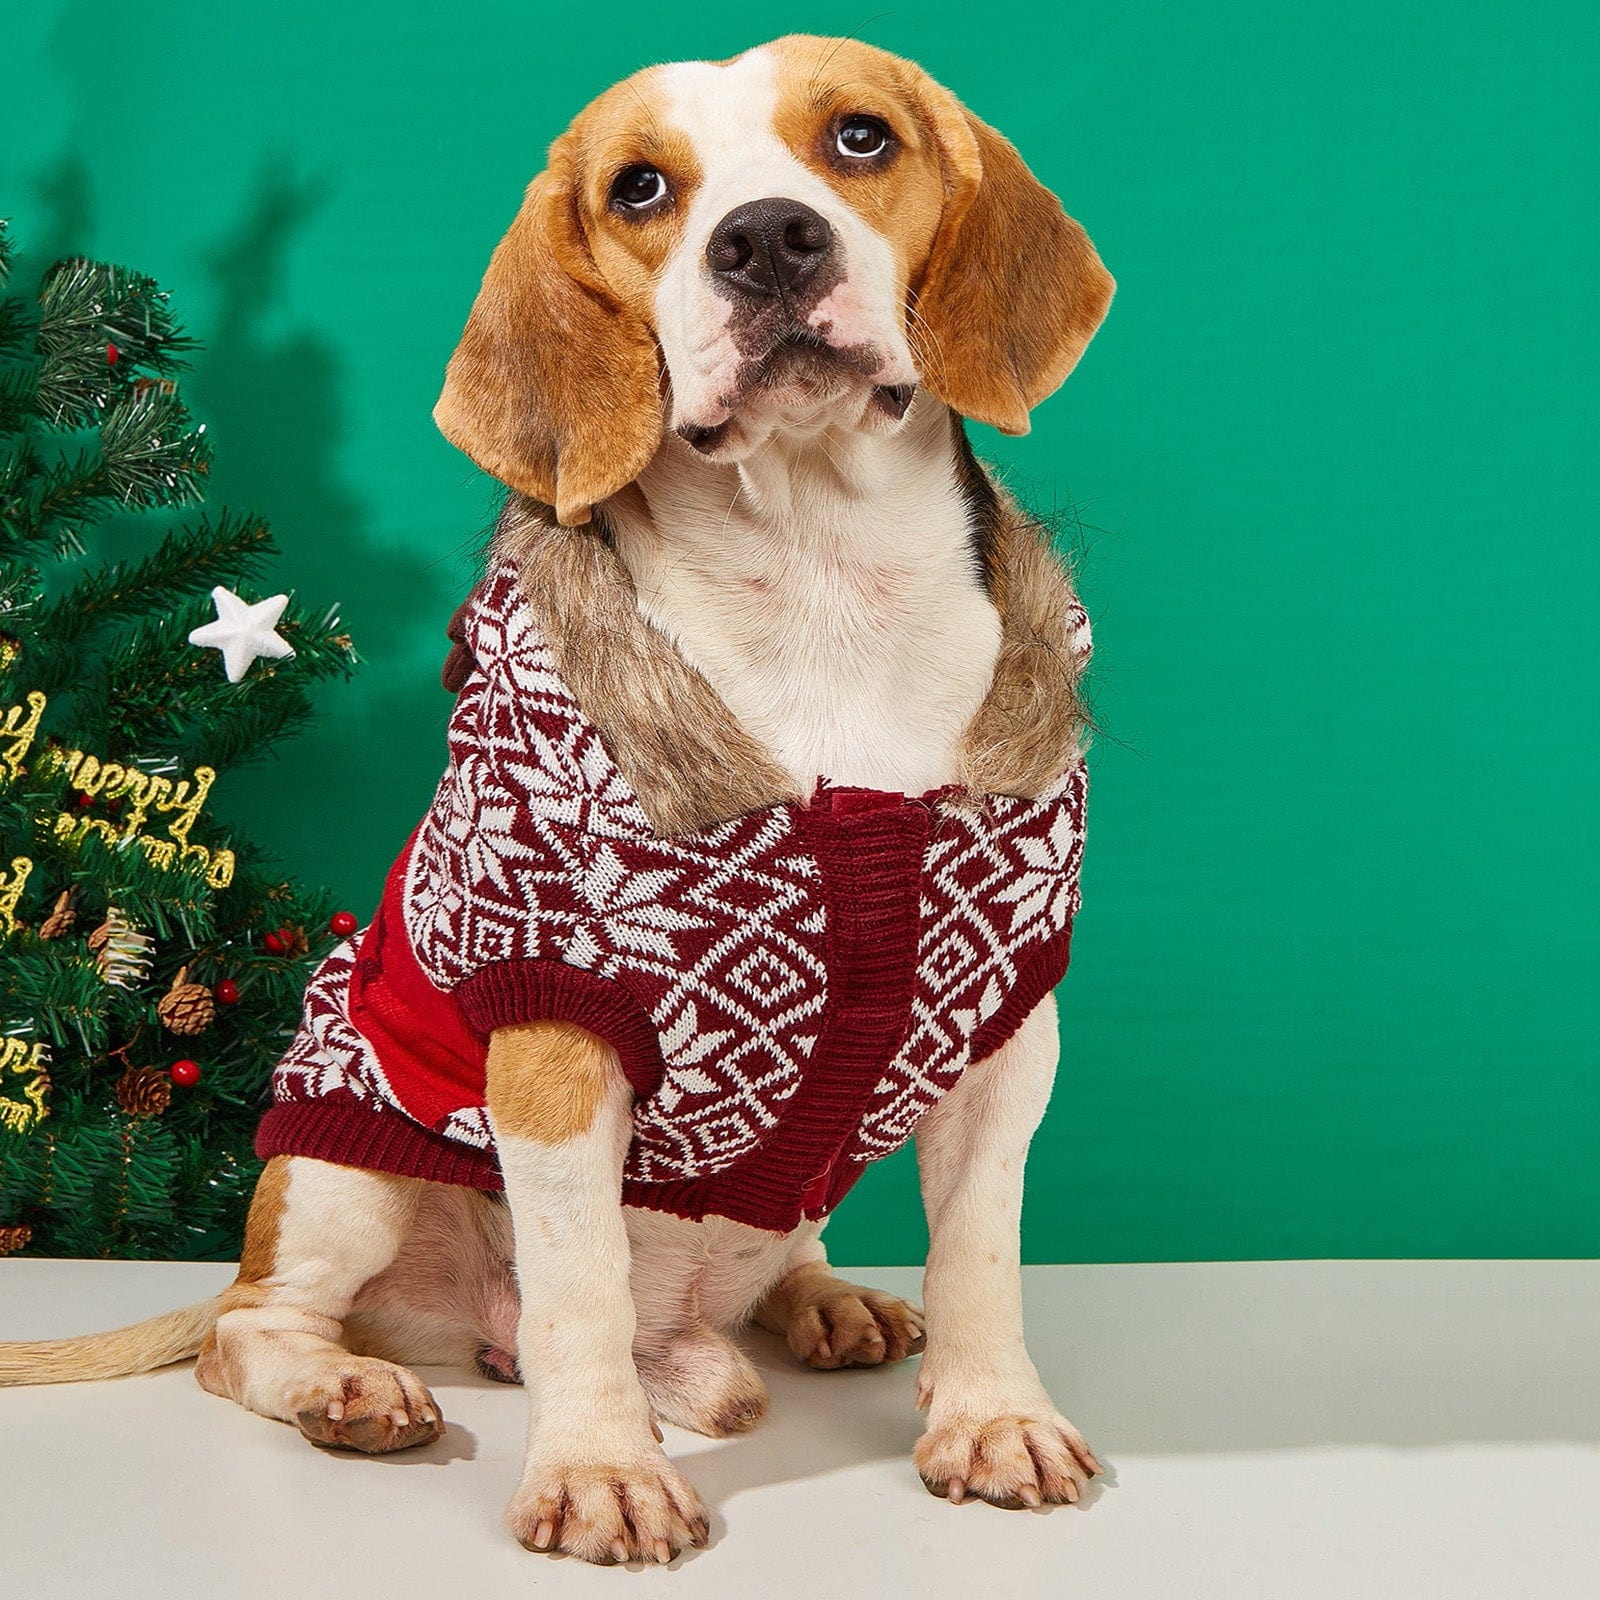 Knit Sweater For Dog - Cosplay As Reindeer